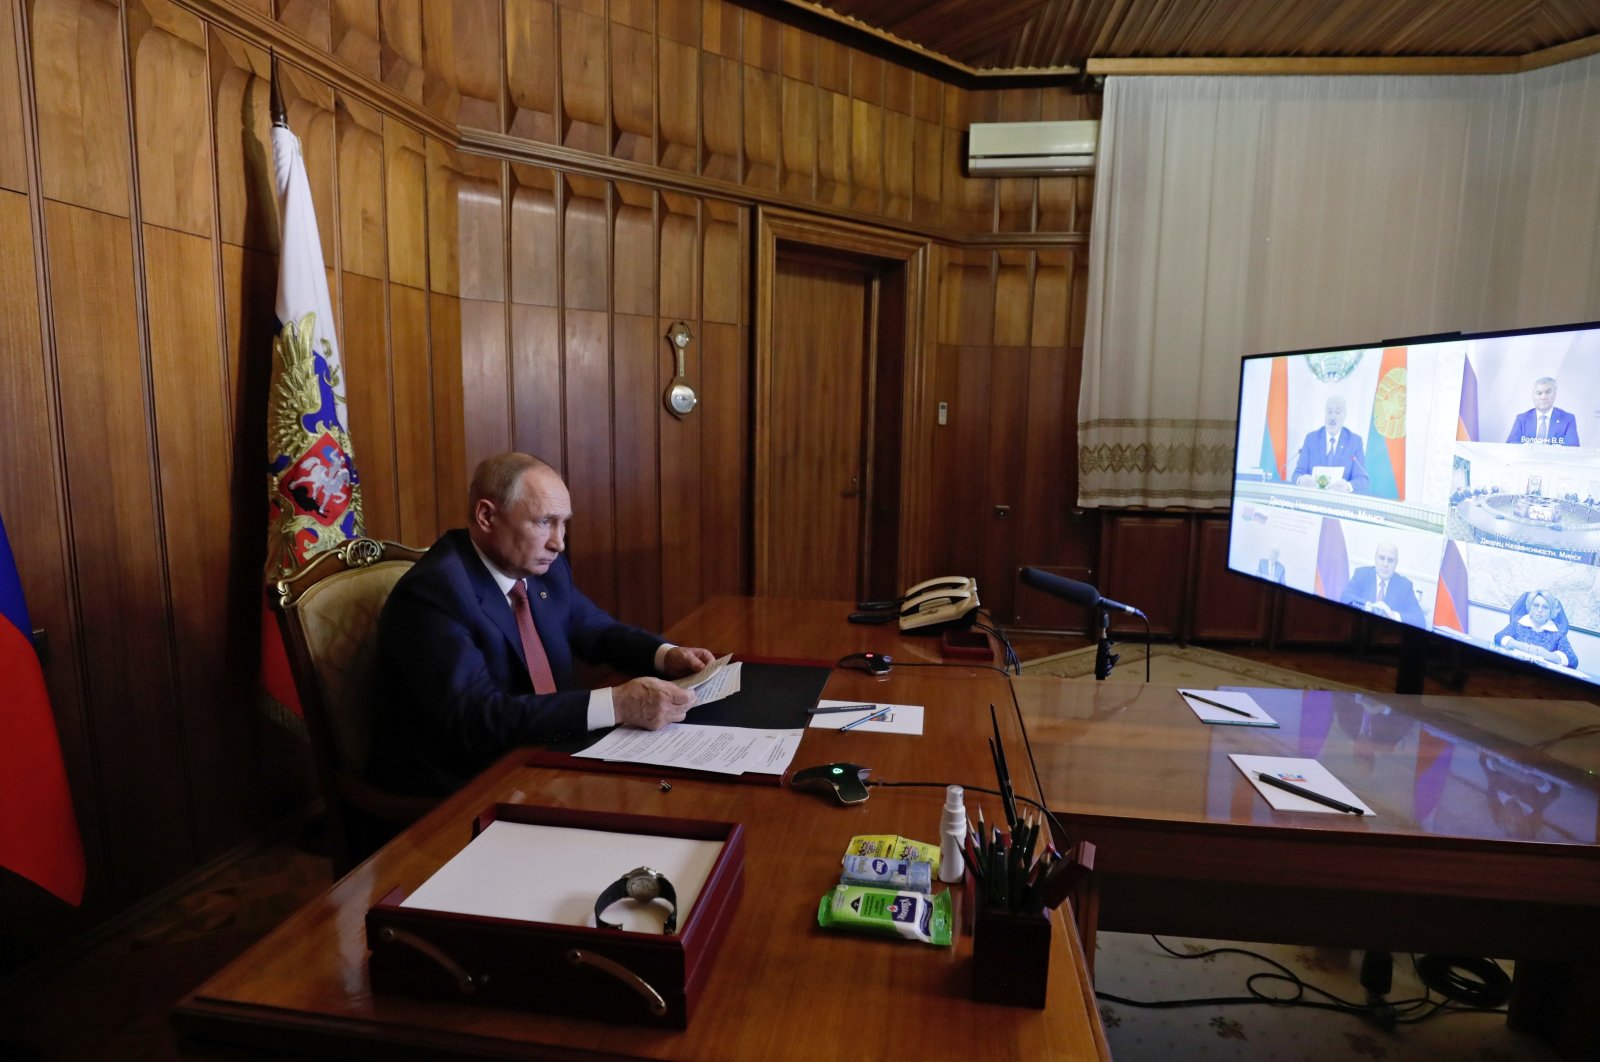 Russian President Vladimir Putin attends a meeting of the Supreme State Council of the Russia-Belarus union state via videoconference from Sevastopol, Crimea, Thursday, Nov. 4, 2021. (Kremlin Pool Photo via AP)